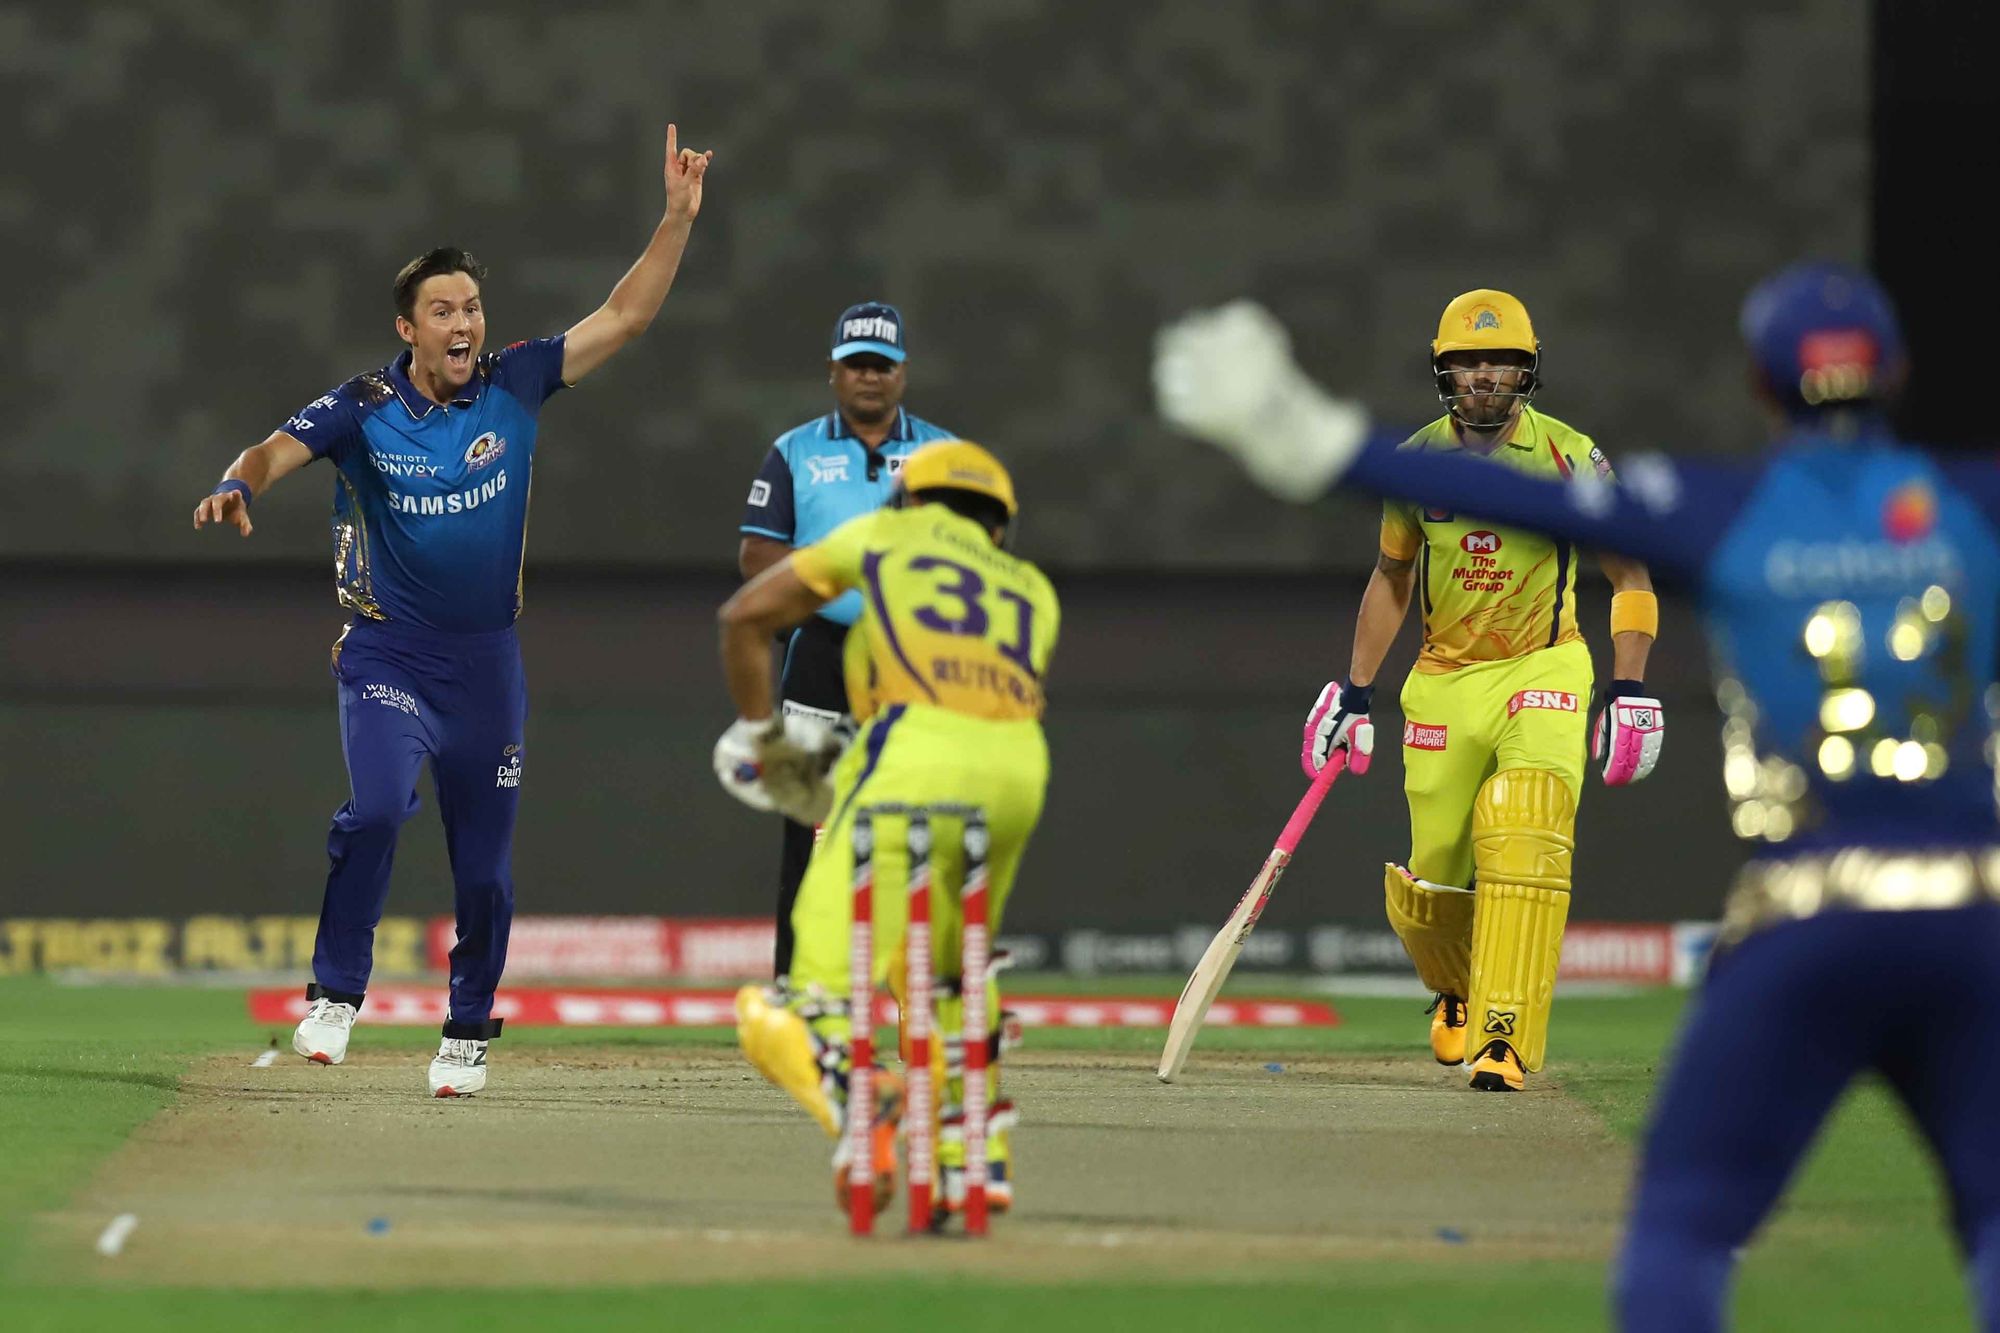 Trent Boult took 4 wickets against CSK in Sharjah. (Photo - BCCI / IPL) 